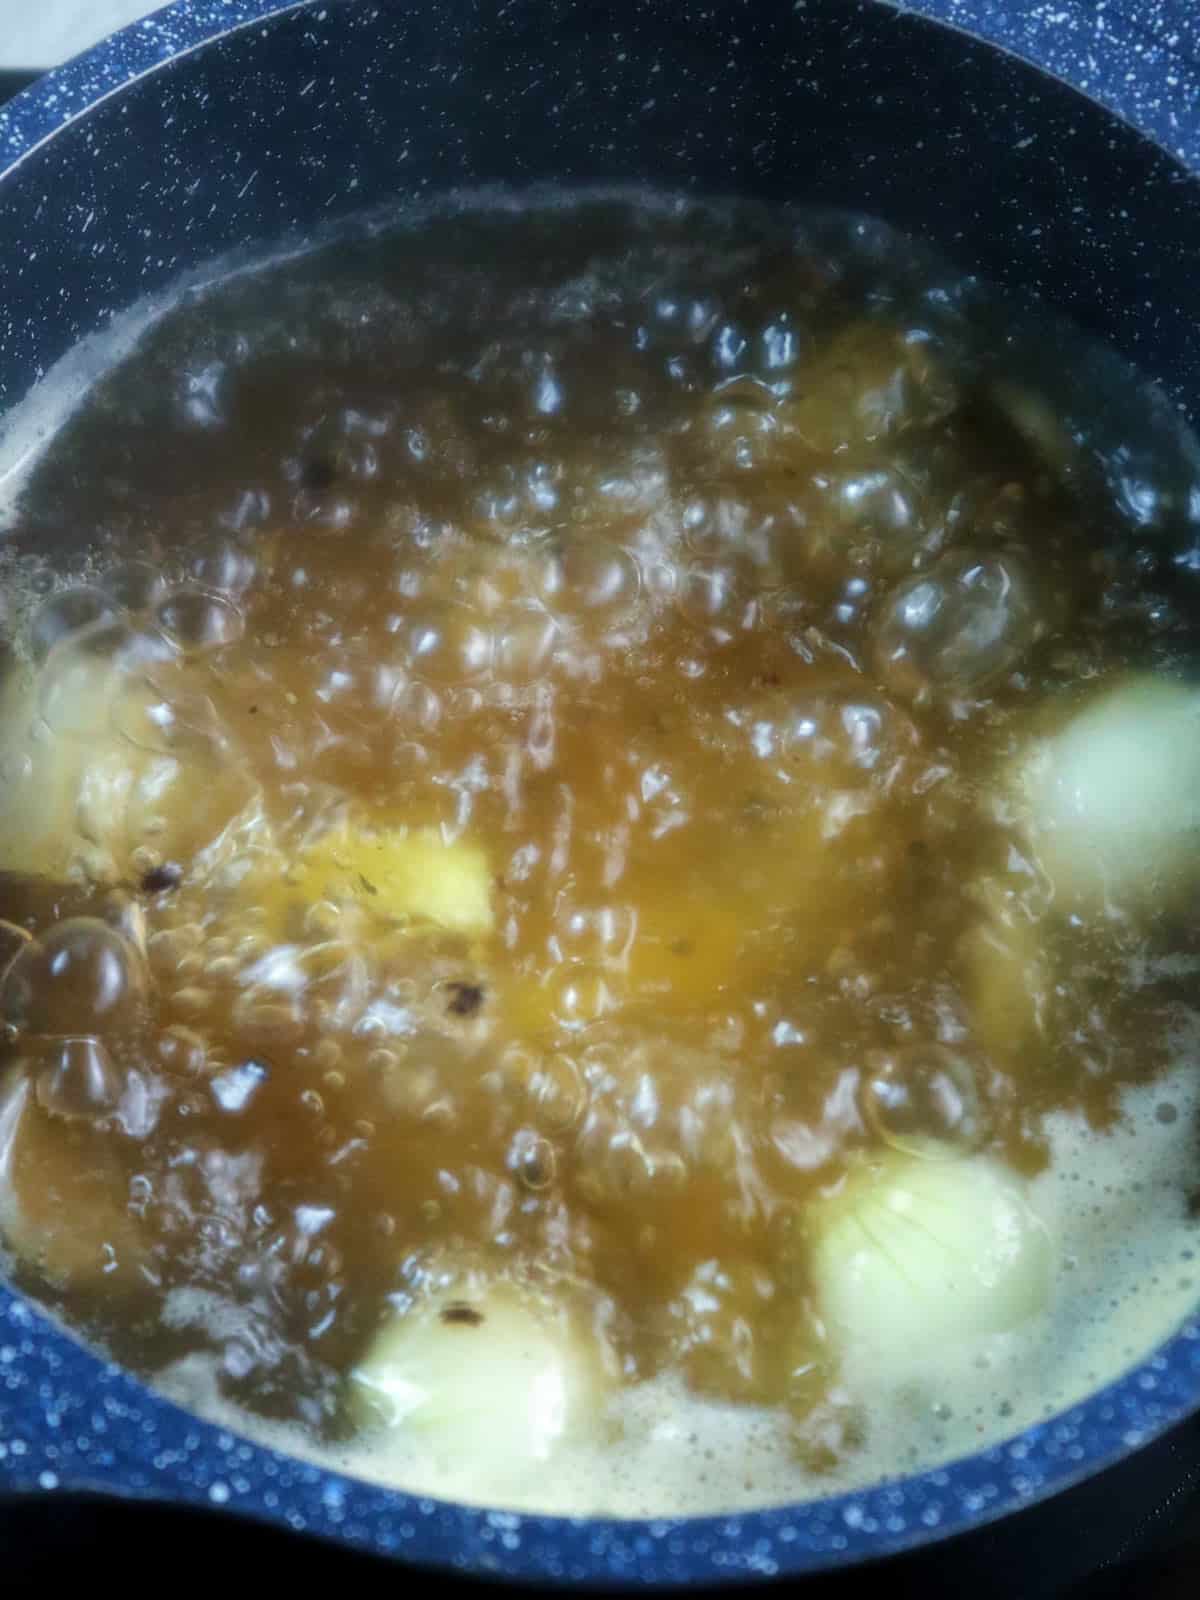 boiling potatoes with onions and pepper corns in a pot